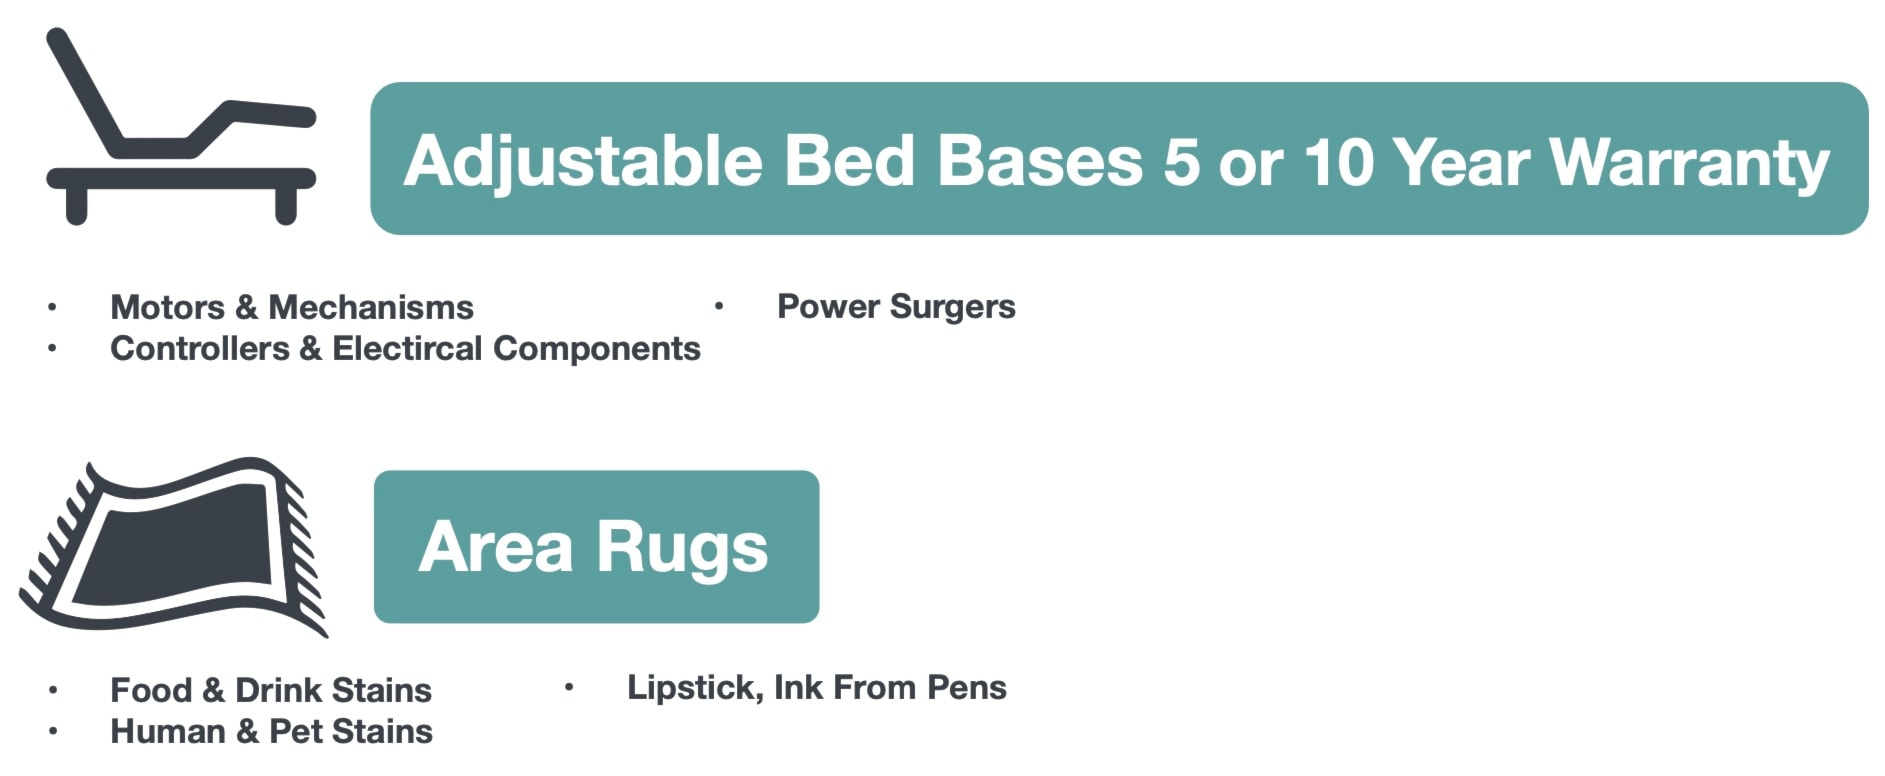 Area Rugs & Adjustable Bed Bases